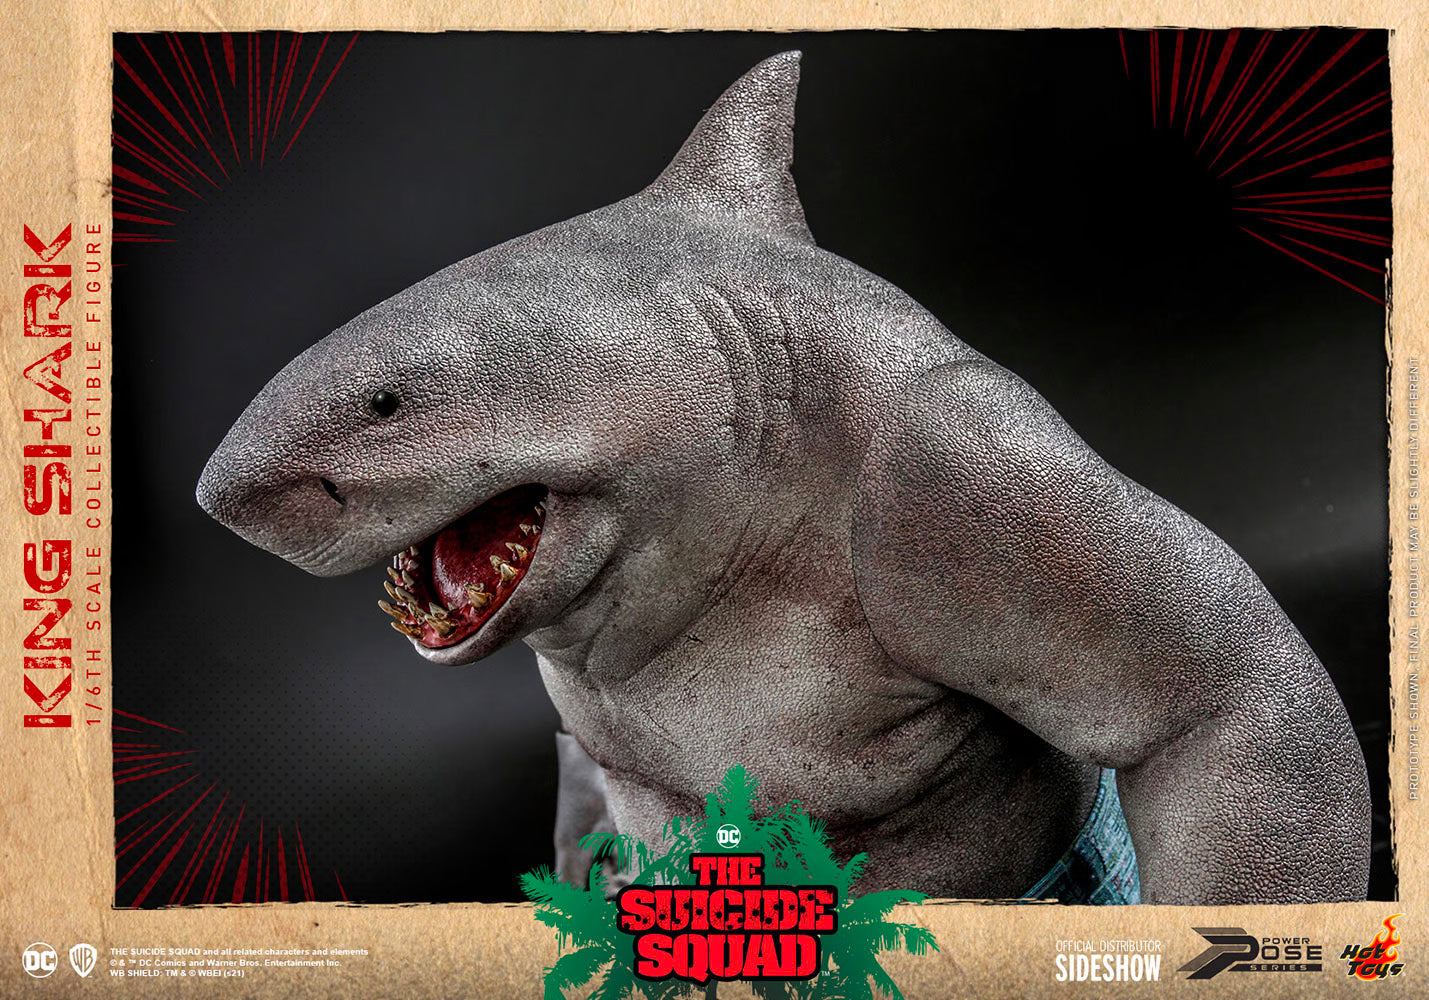 Hot Toys x Sideshow Collectibles: DC - The Suicide Squad - King Shark Sixth Scale Figure